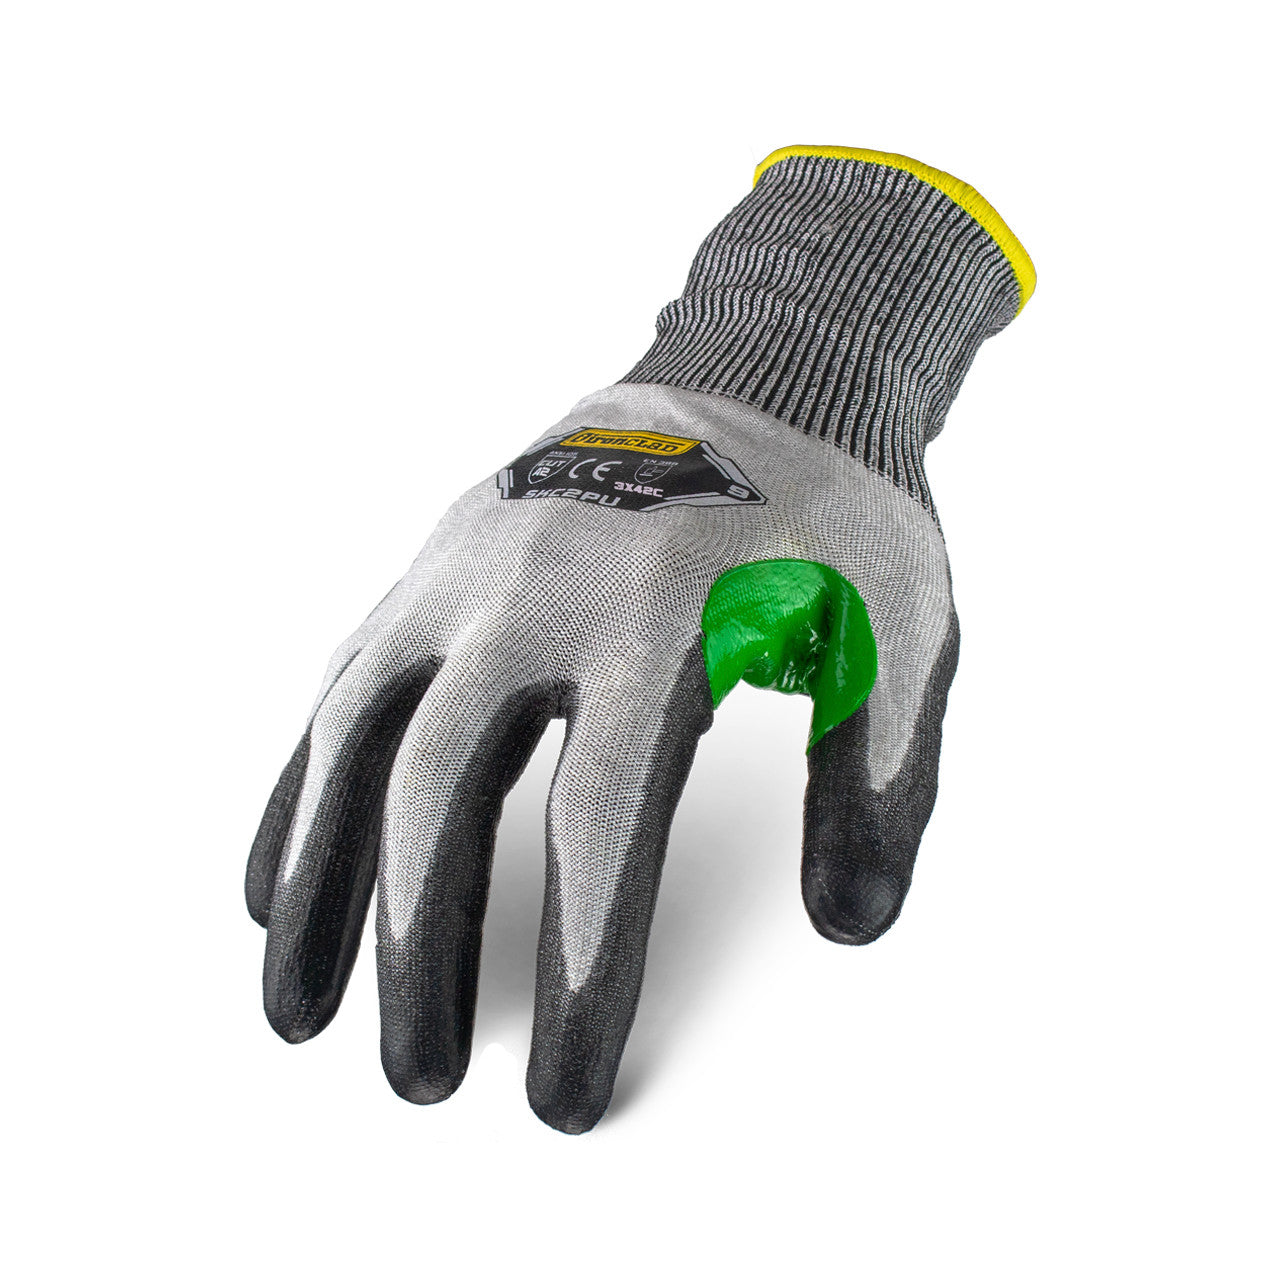 Ironclad Command™ A2 PU Glove Grey-eSafety Supplies, Inc